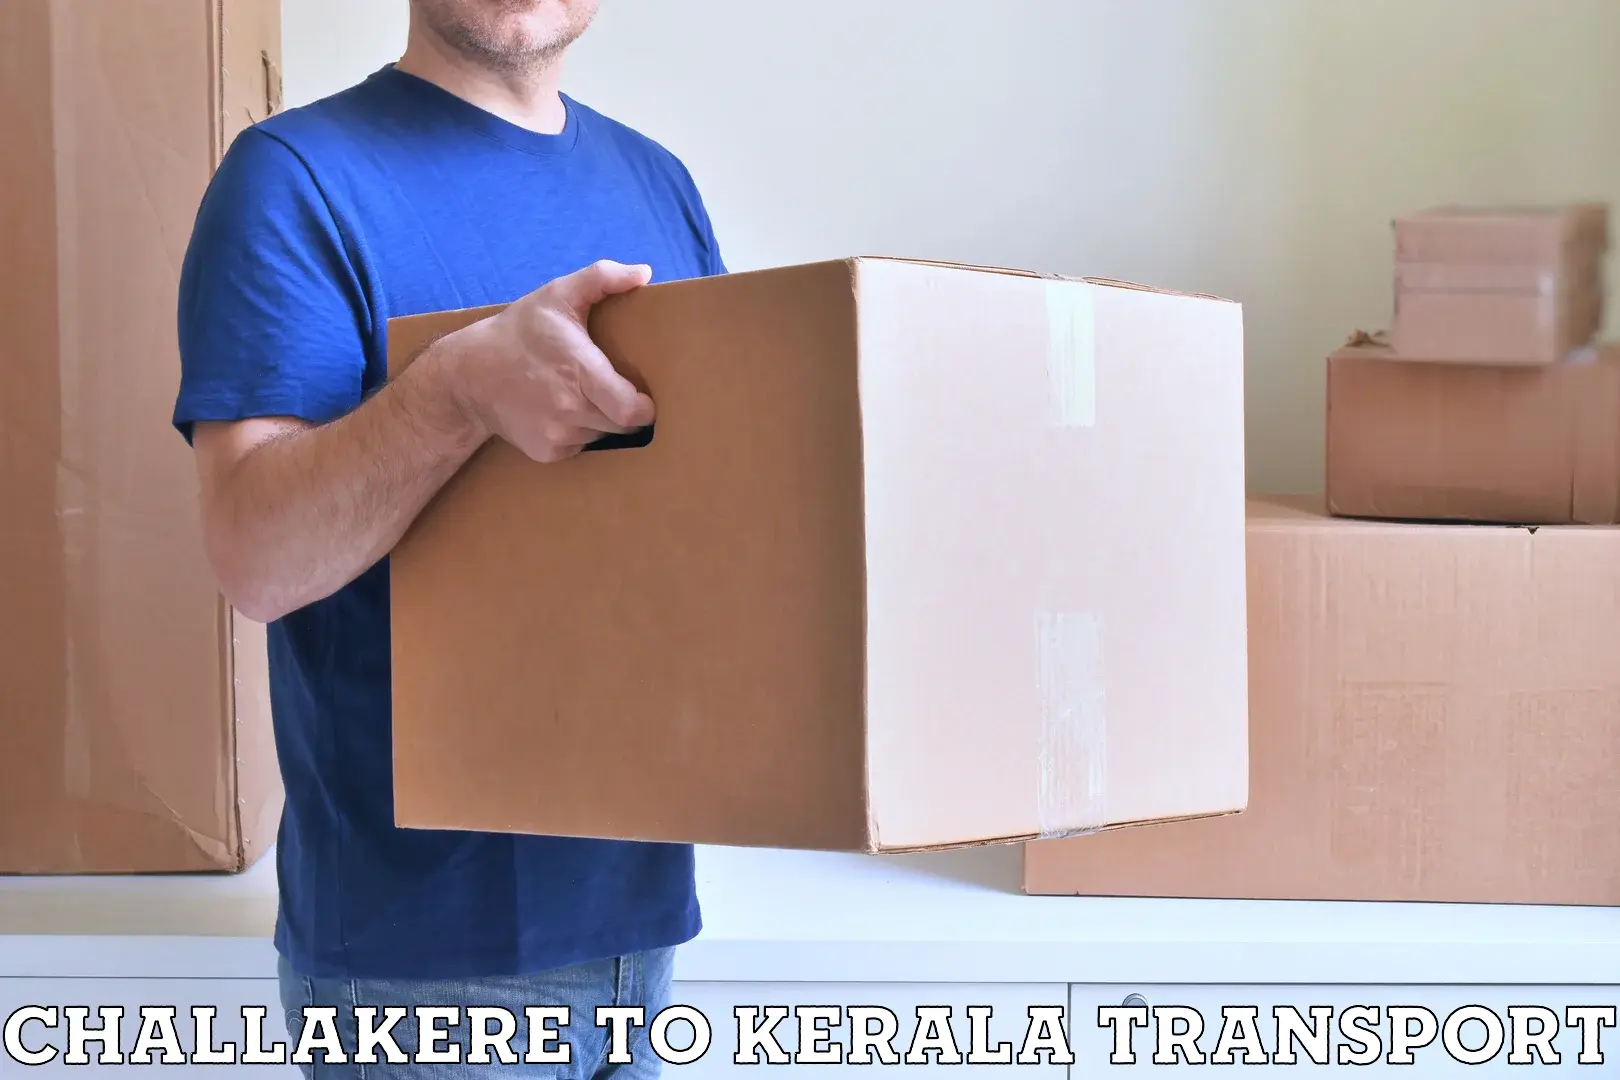 Truck transport companies in India Challakere to Panthalam